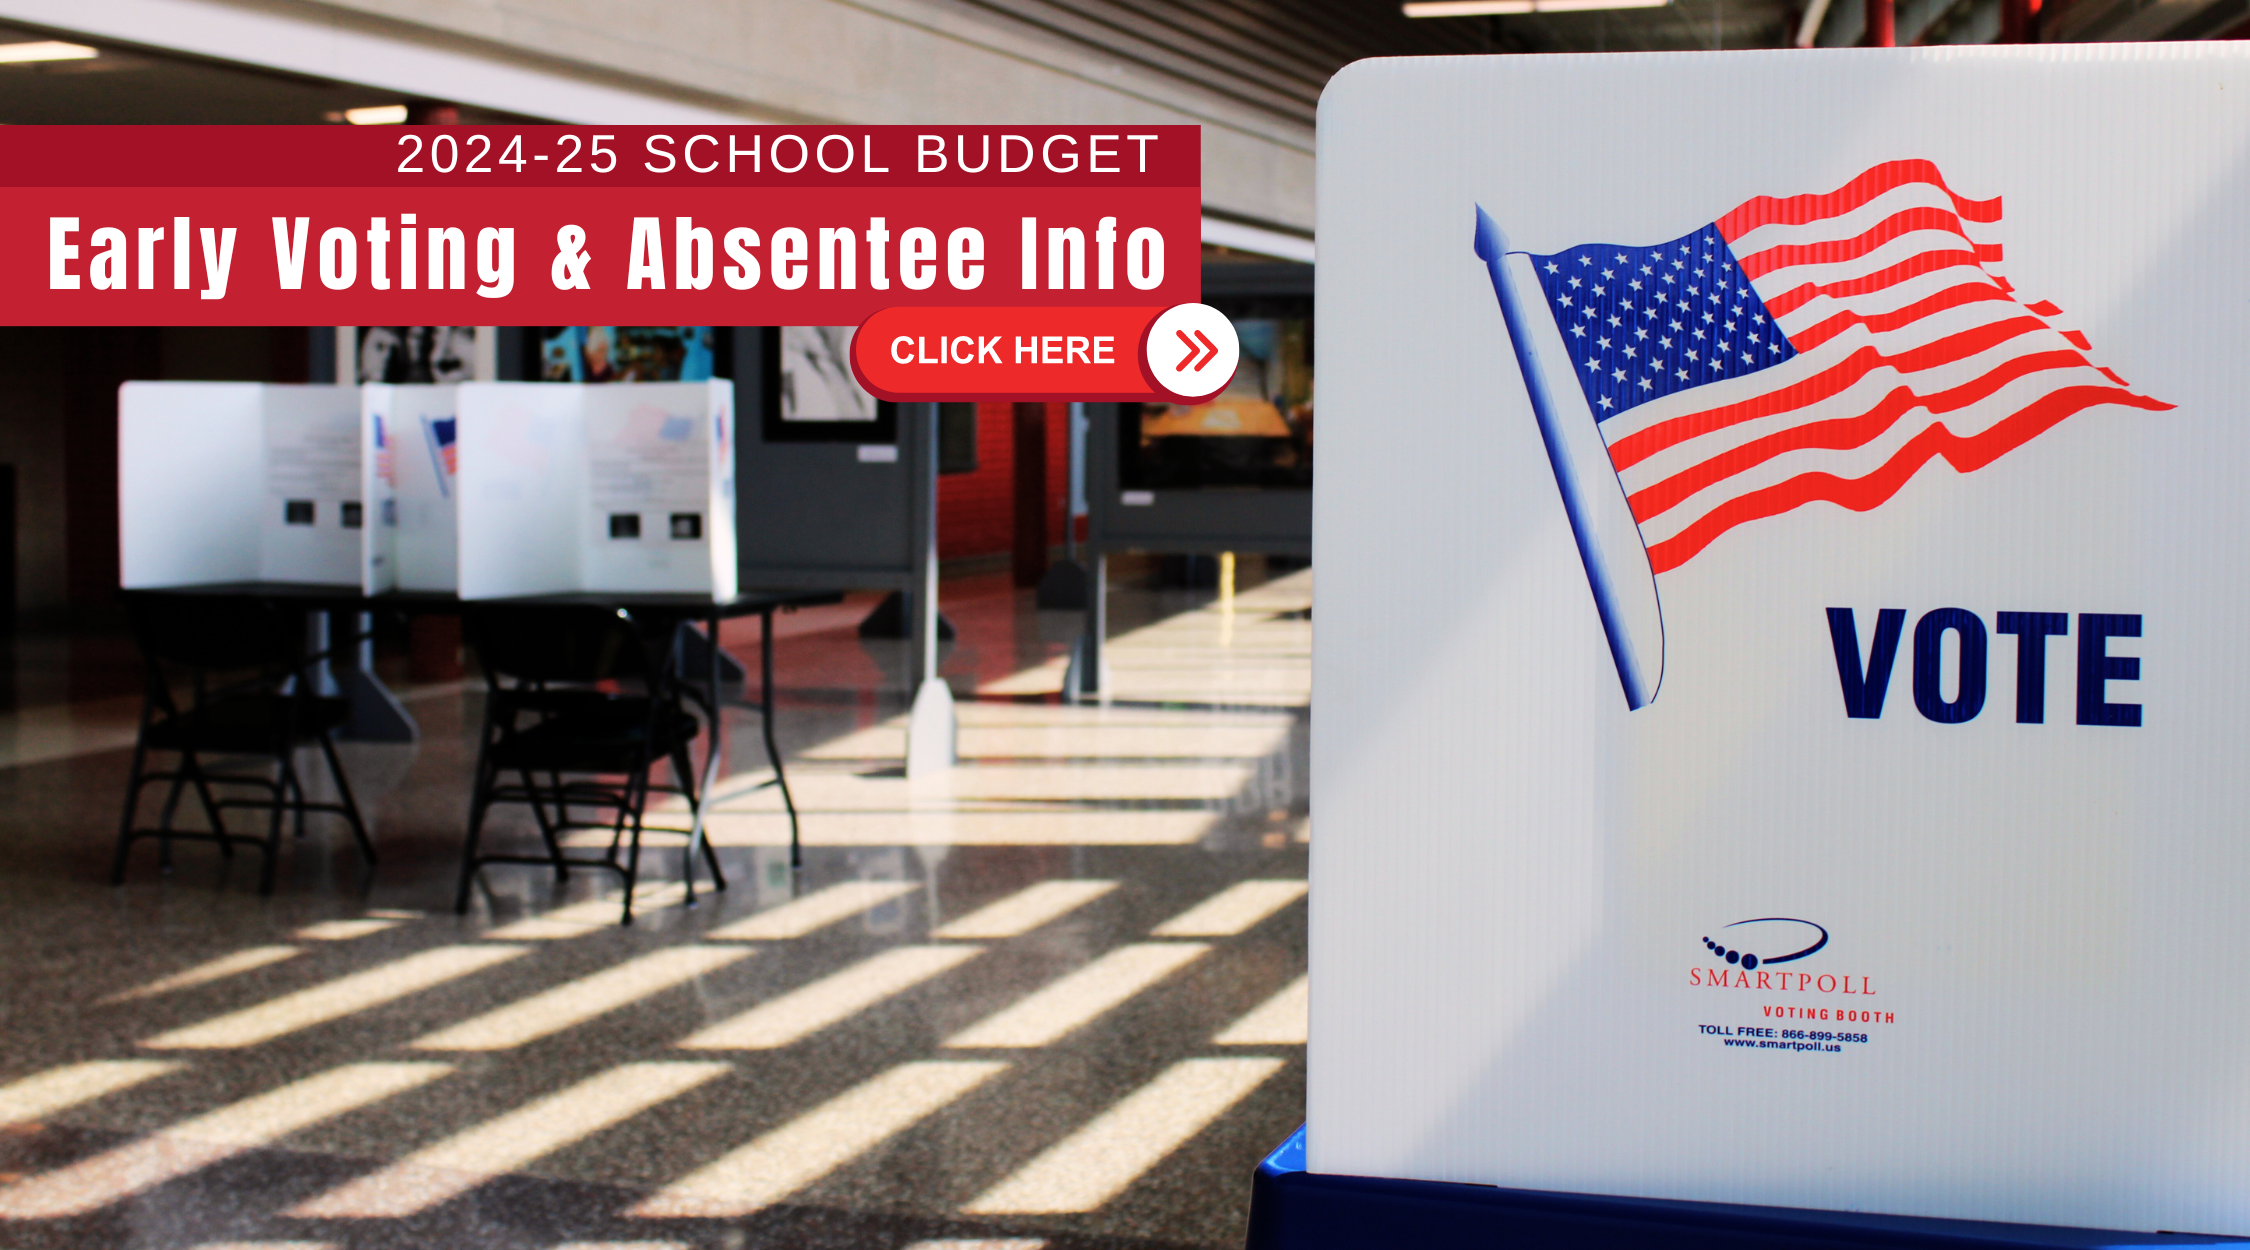 Image of school budget voting booths with early voting and absentee info text.